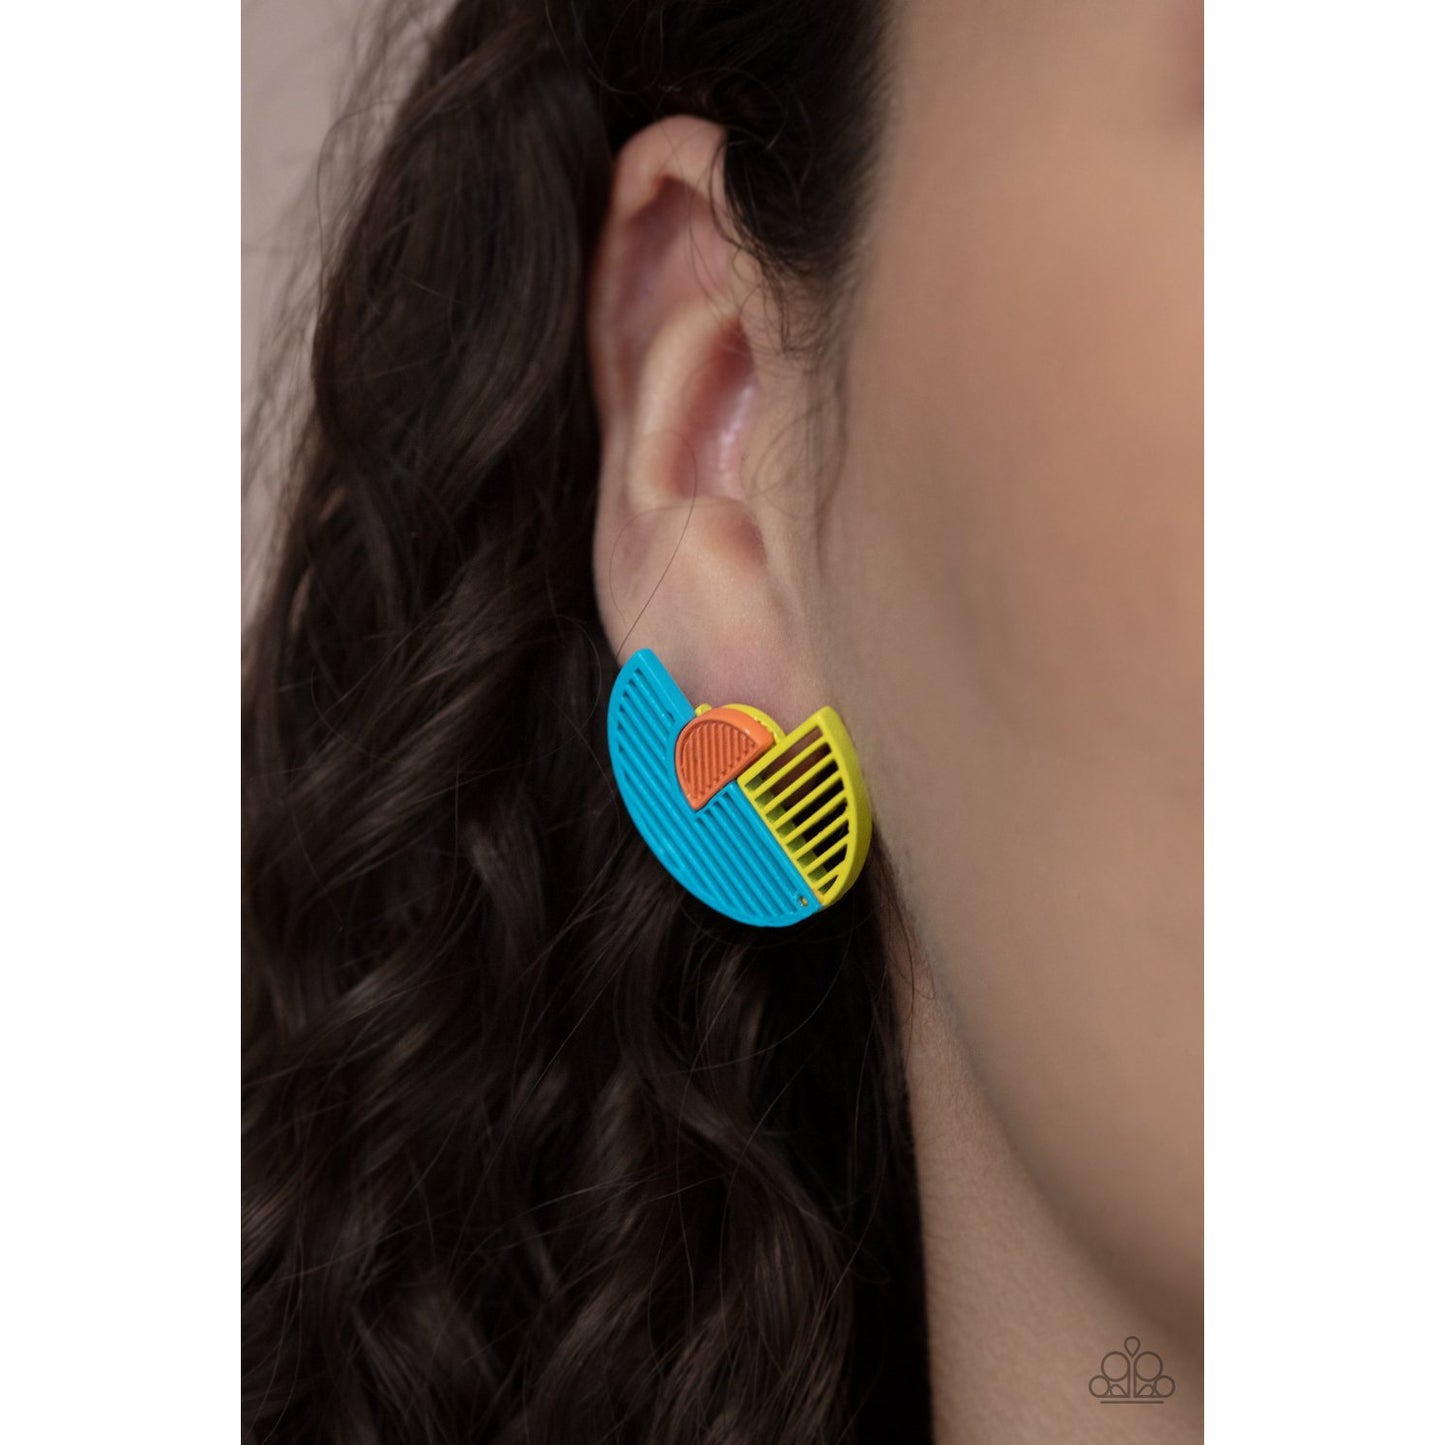 Its Just an Expression - Blue Post Earrings - Paparazzi Accessories - GlaMarous Titi Jewels